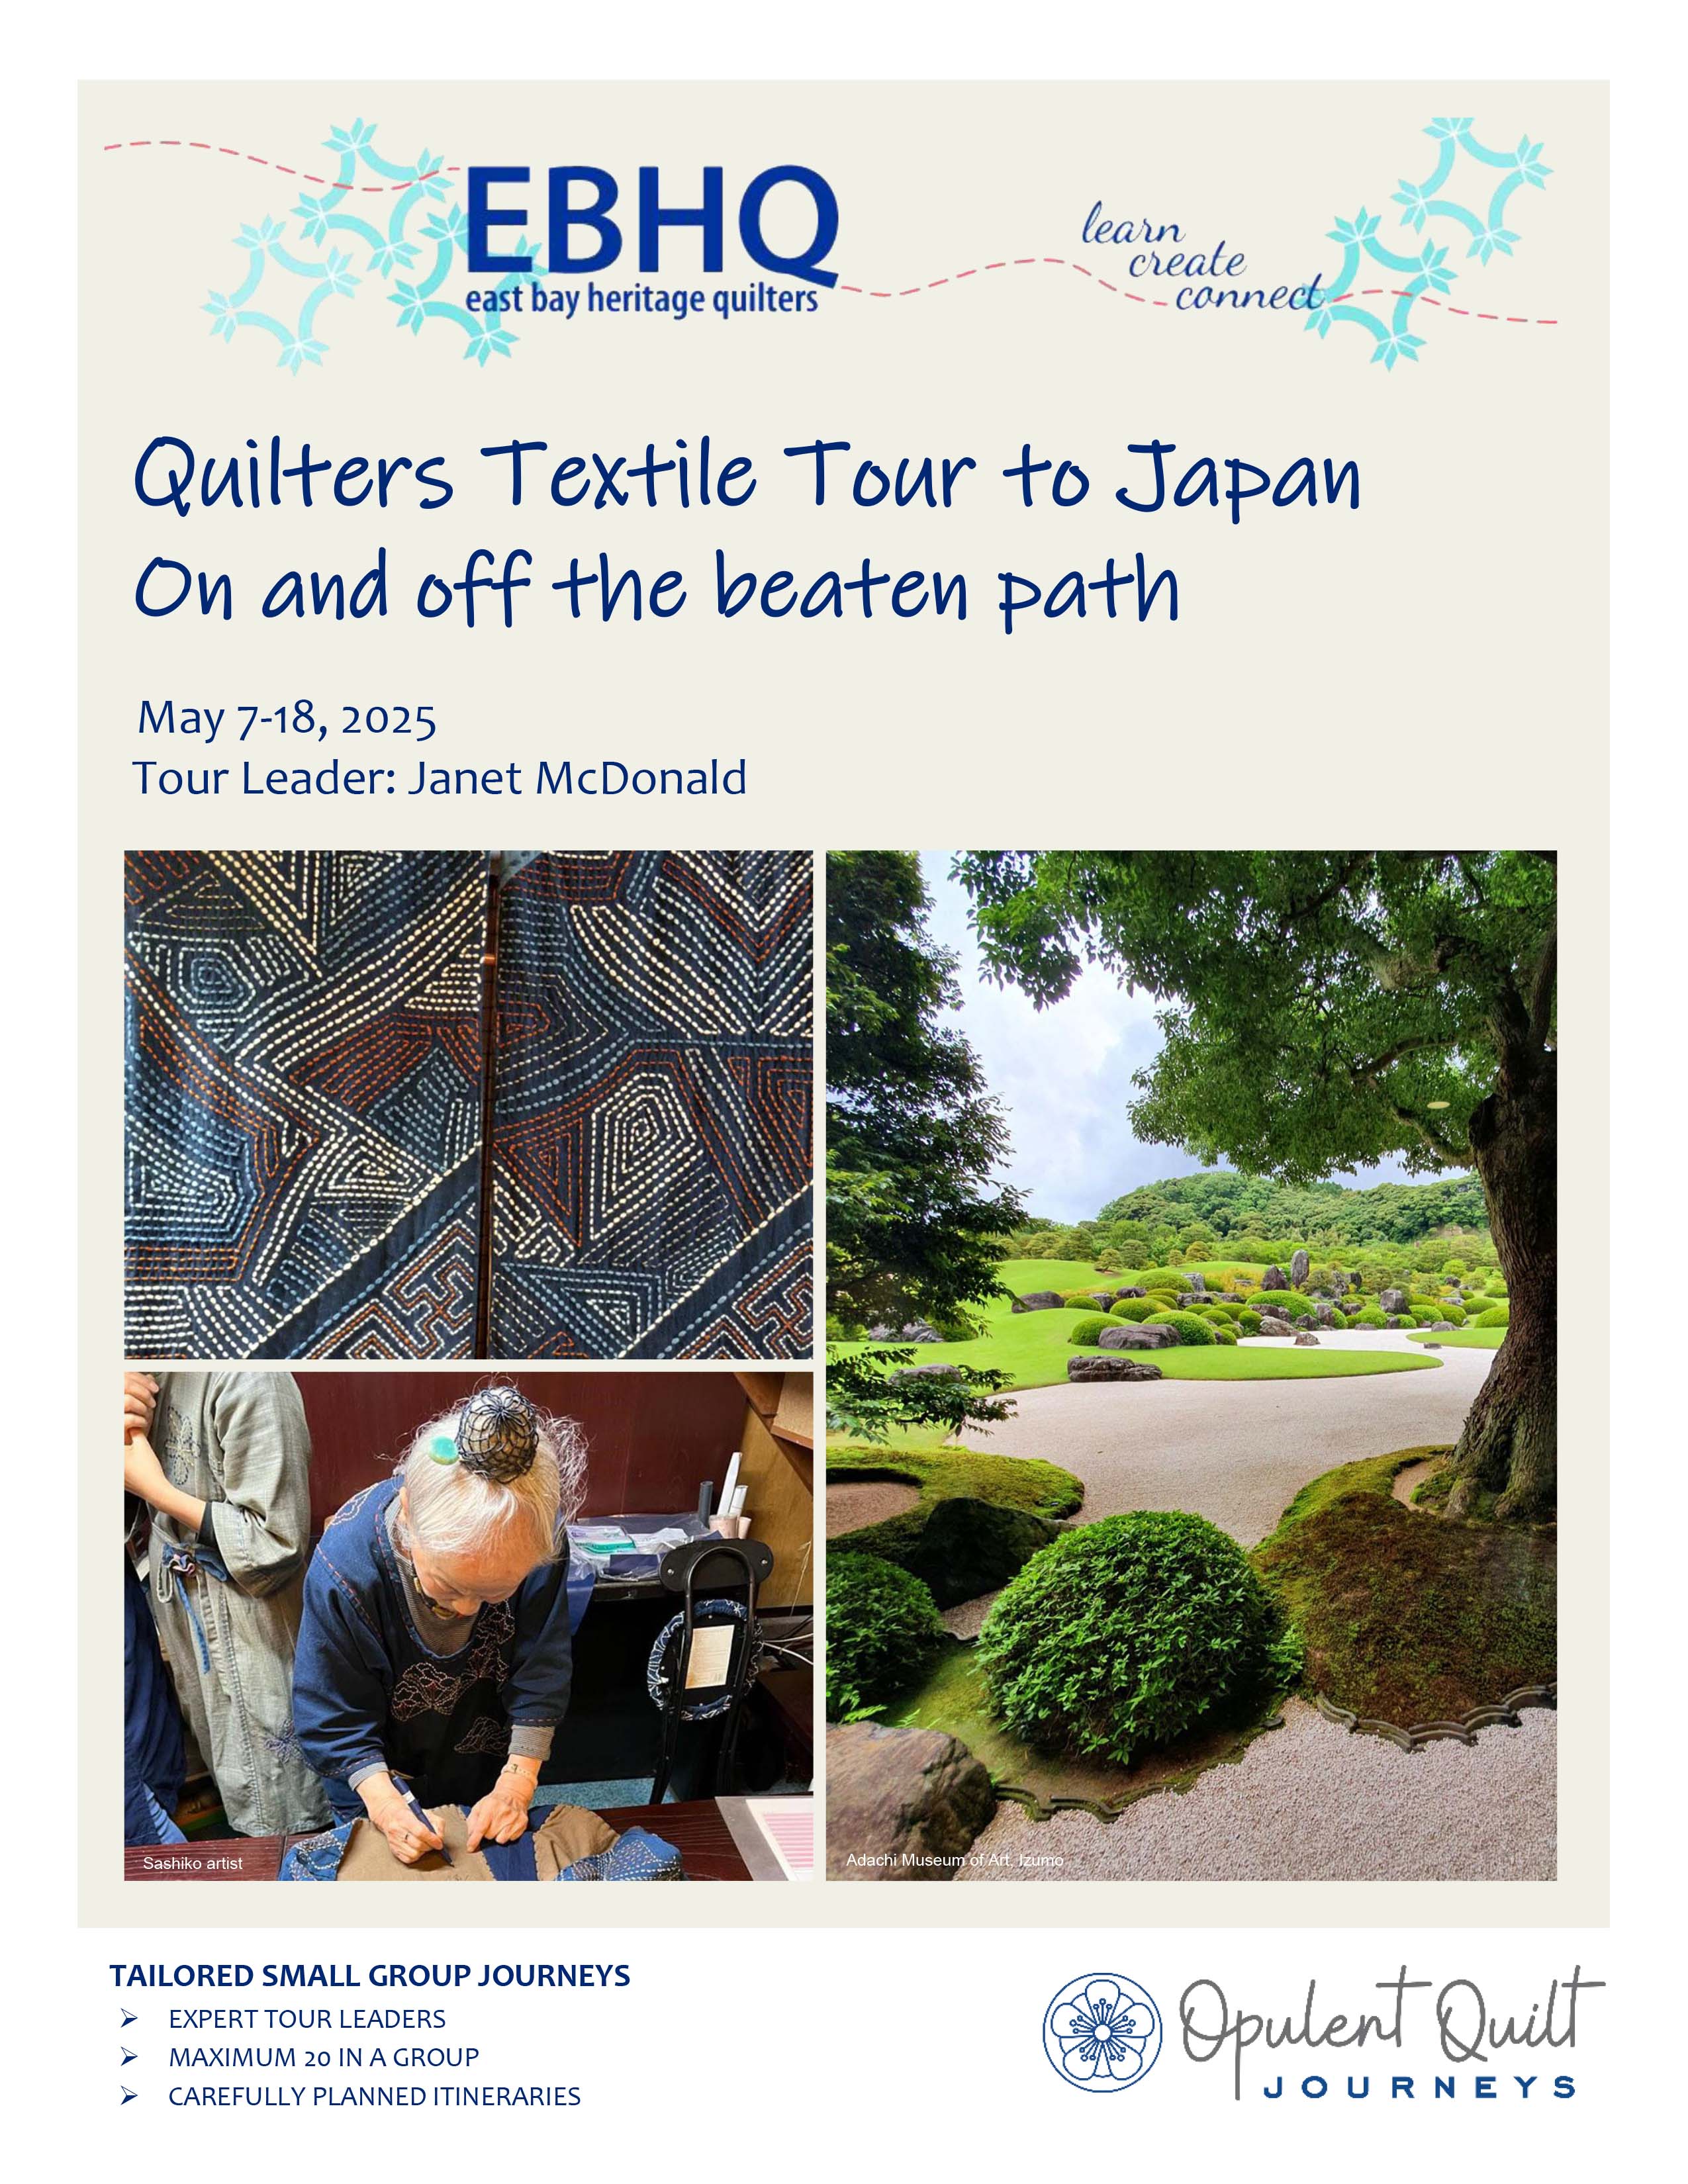 EBHQ Quilters Textile Tour to Japan brochure 